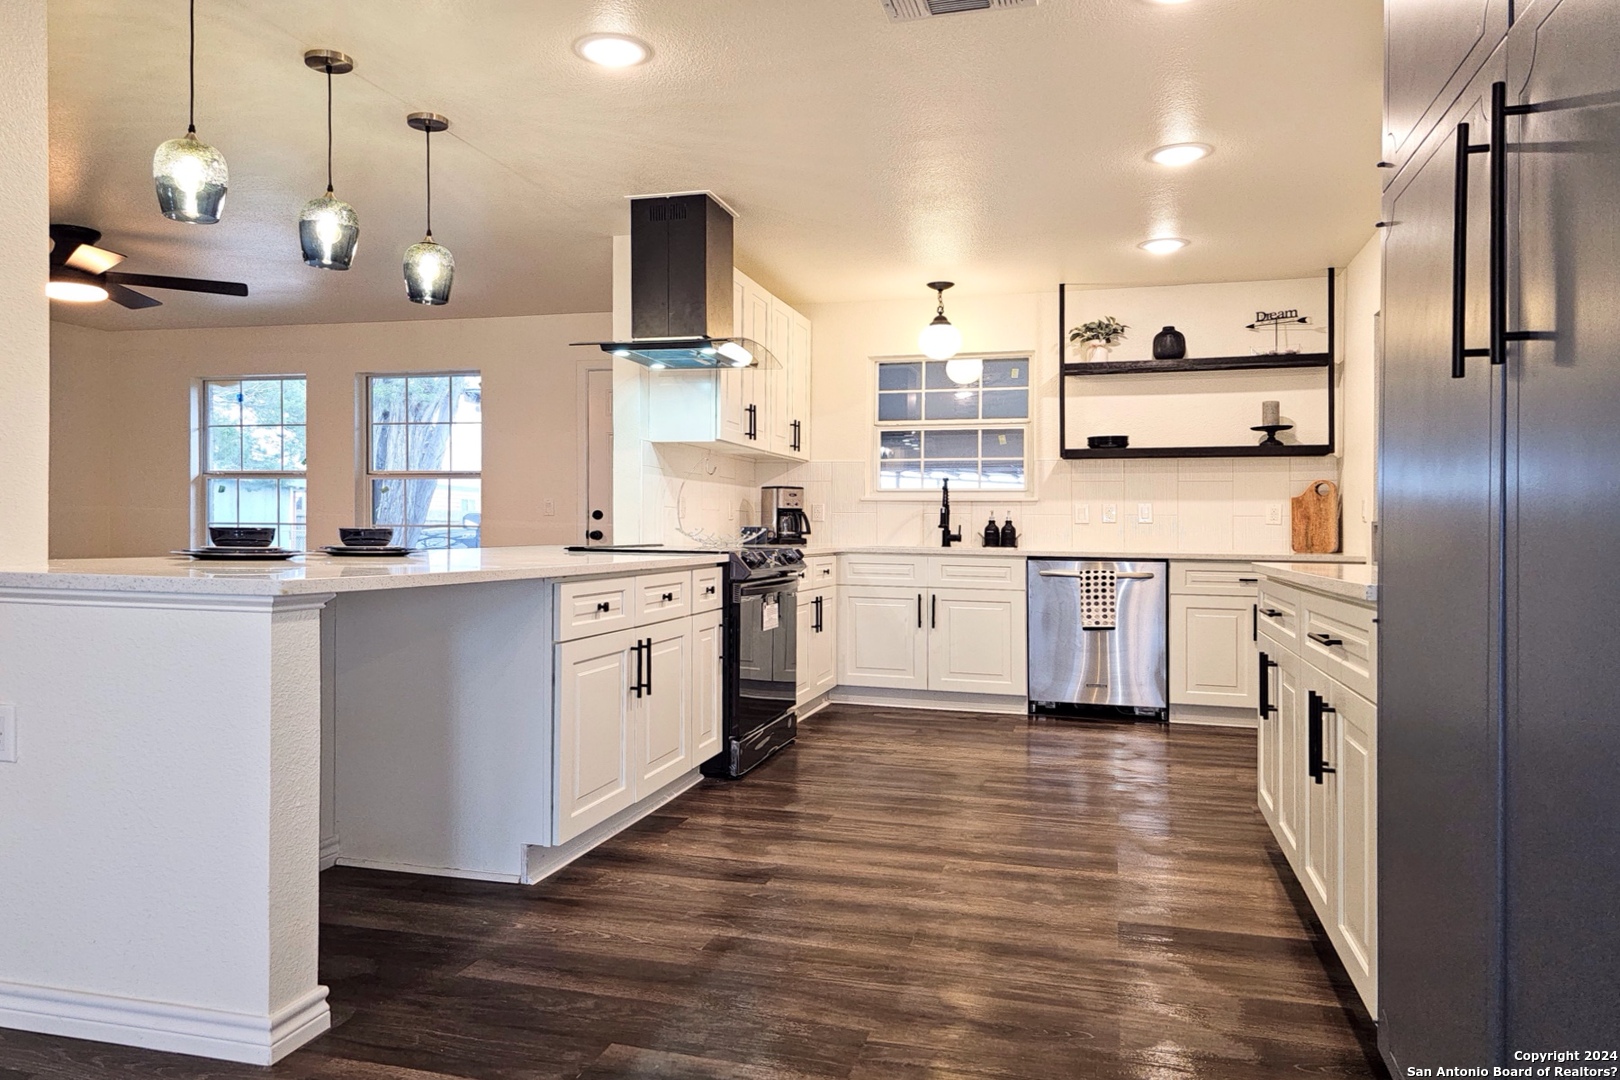 a kitchen with stainless steel appliances kitchen island granite countertop a sink a stove and refrigerator